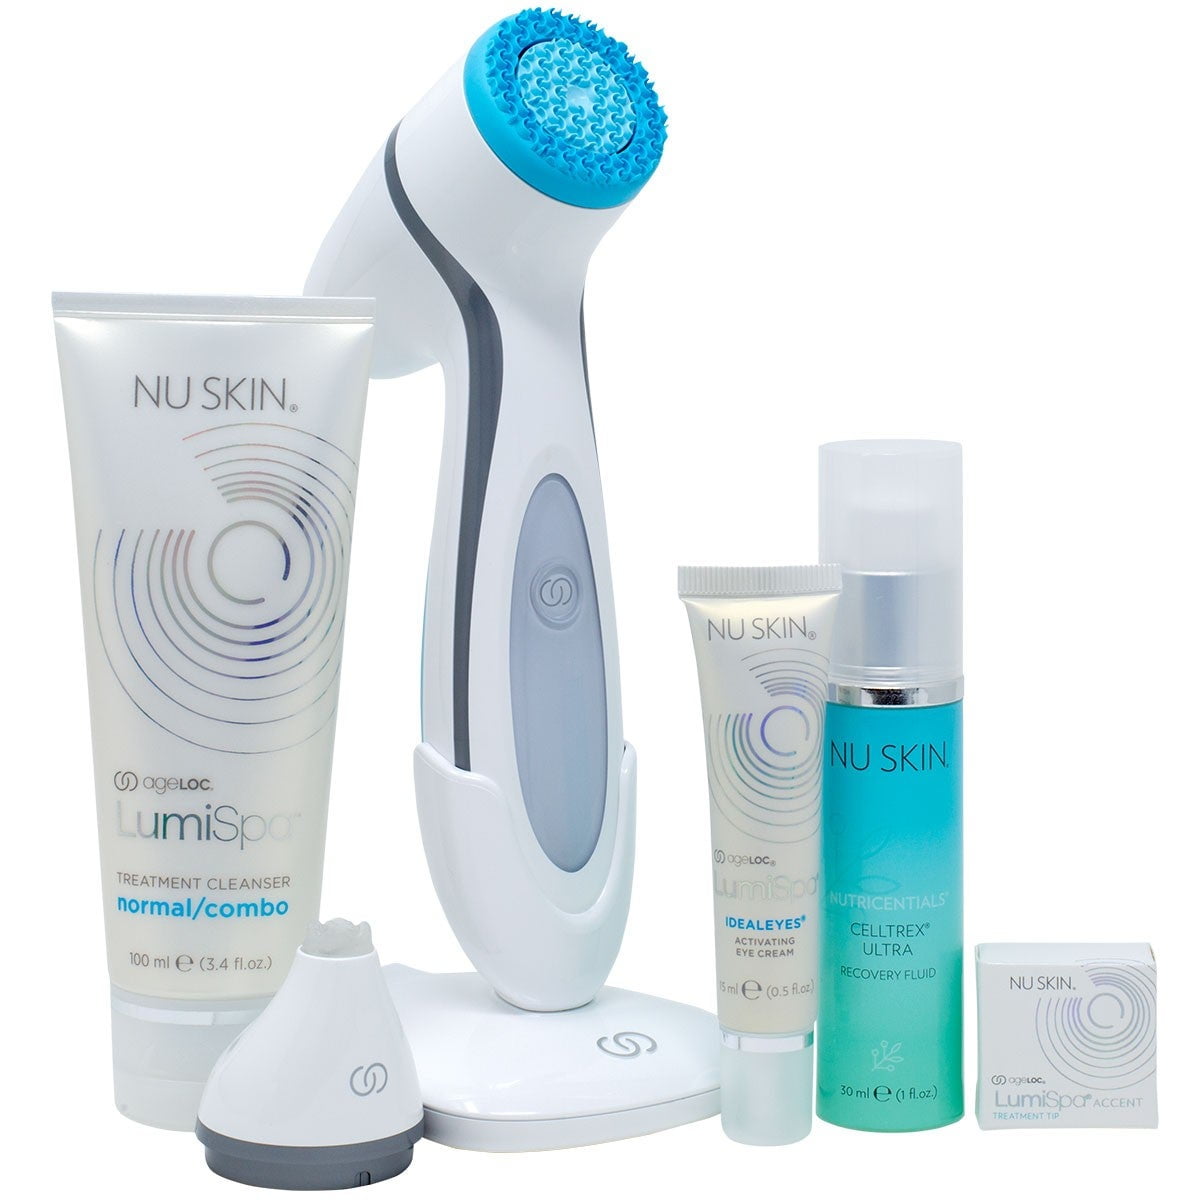 Nu Skin ageLOC LumiSpa Accent Kit for Normal/Combo Skin Types